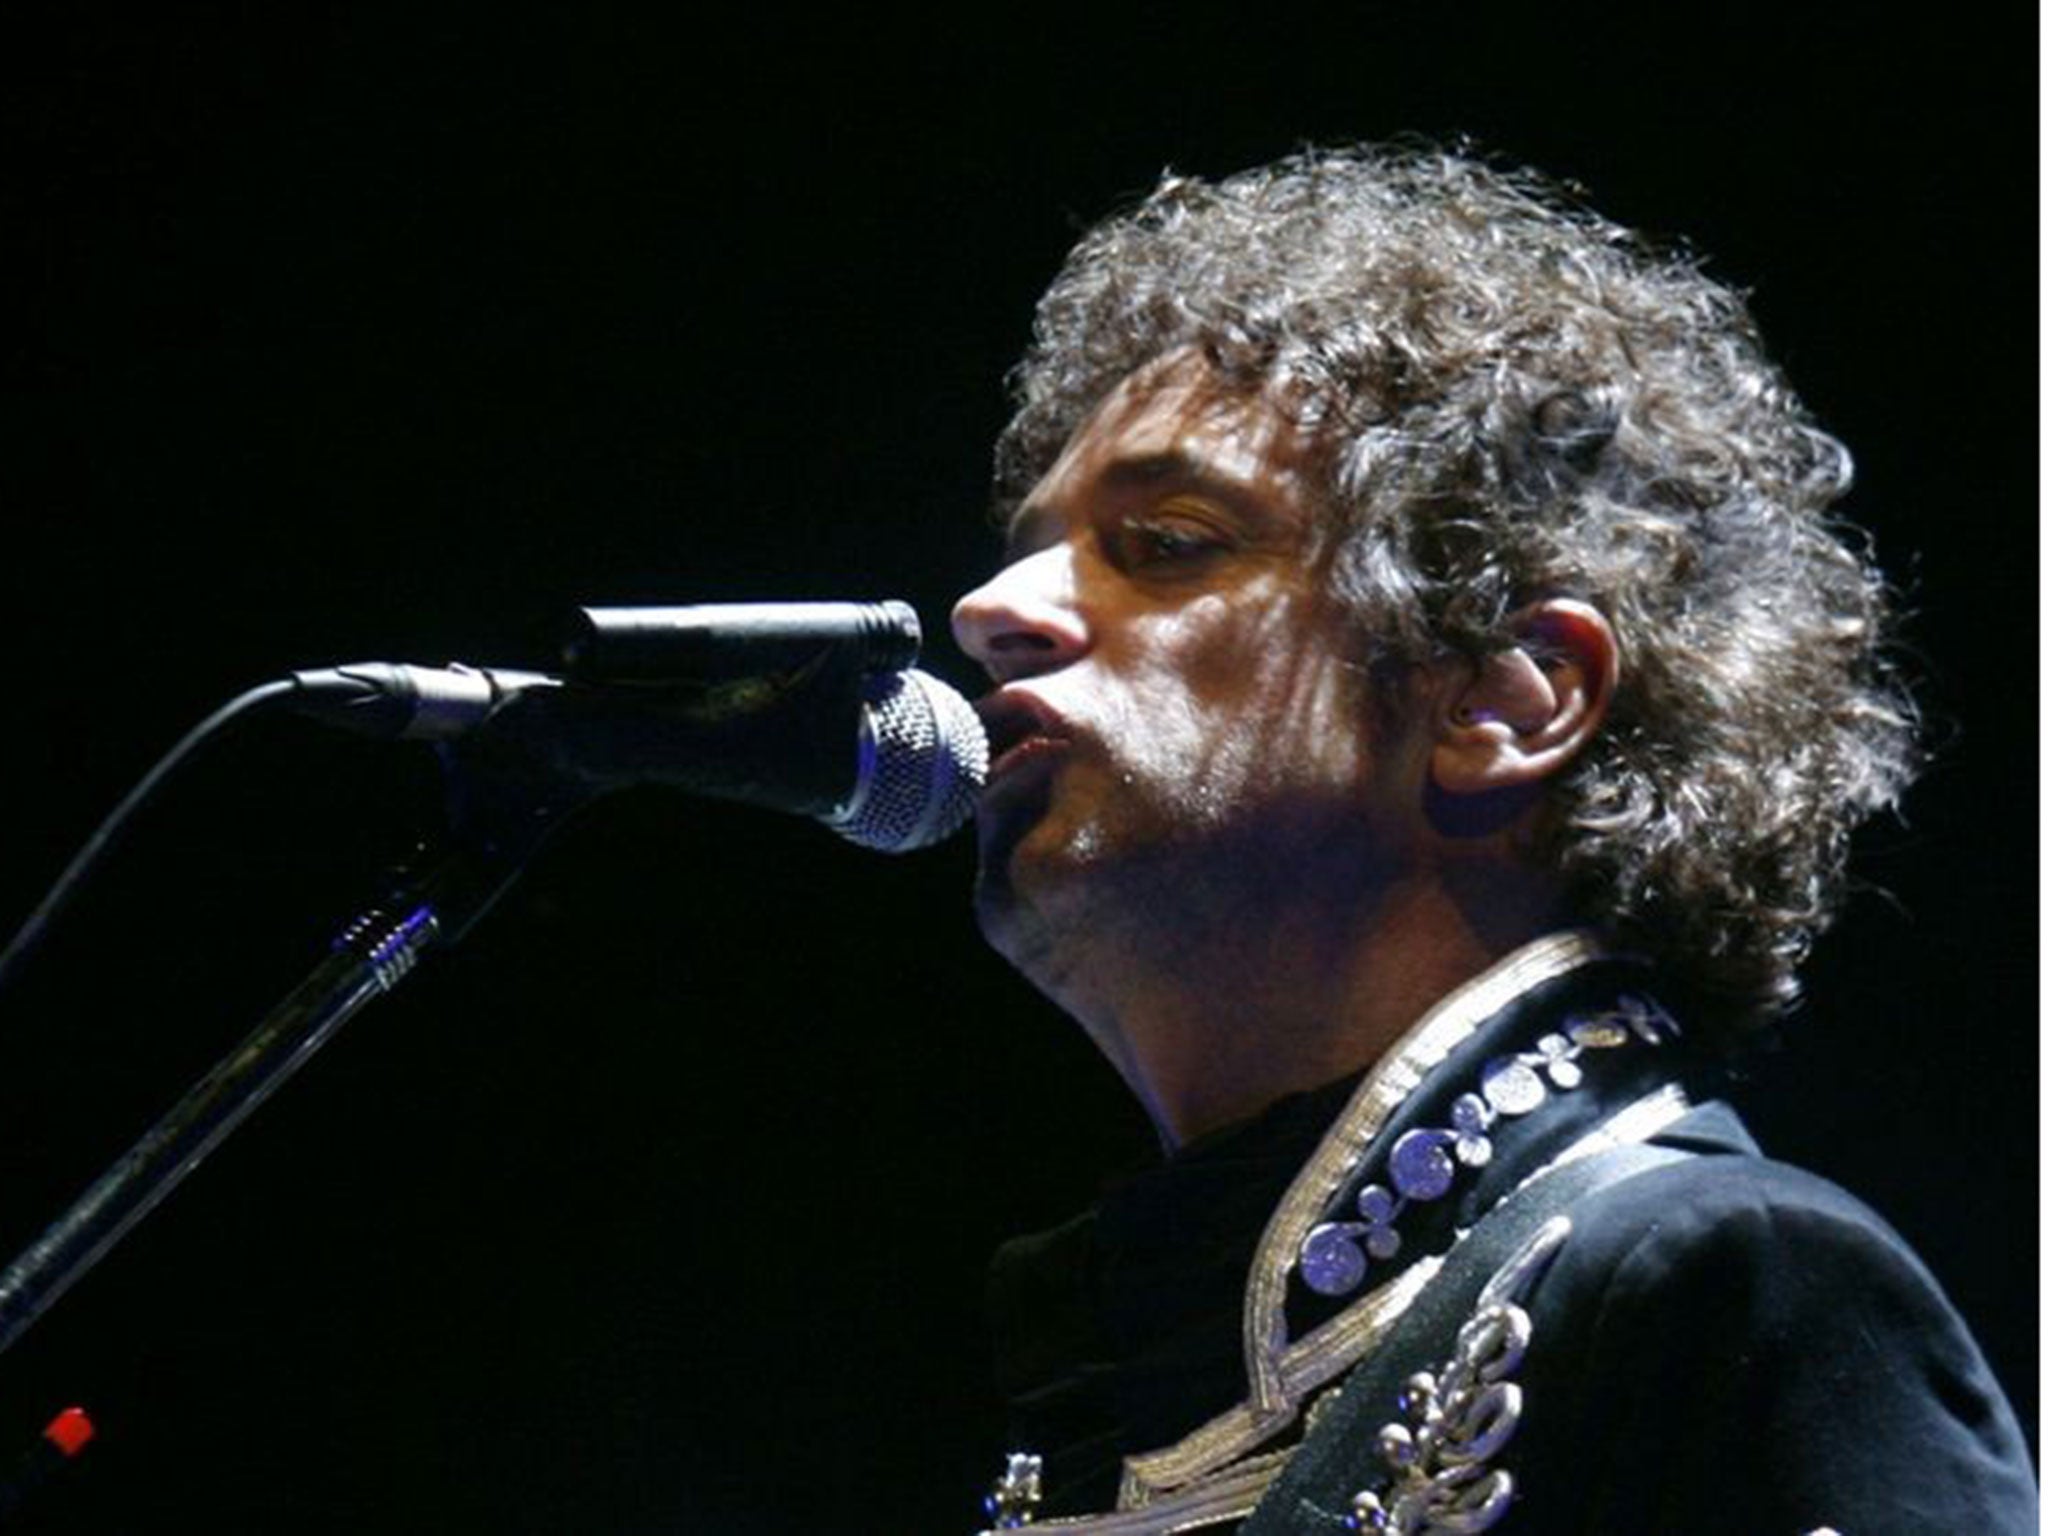 Cerati in 2010: he had enjoyed a successful solo career since the break-up of Soda Stereo